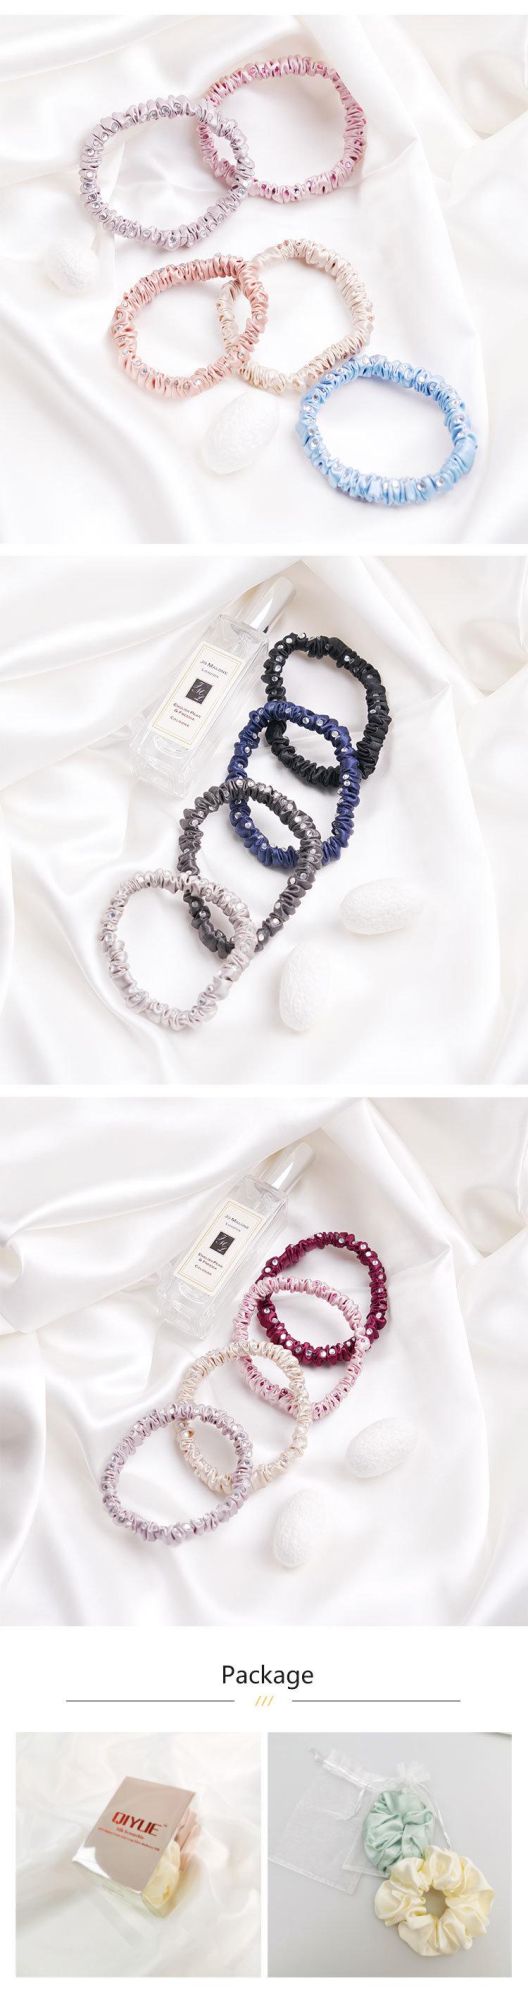 New Arrival 22 Momme Silk Small 1cm Scrunchies with Crystal